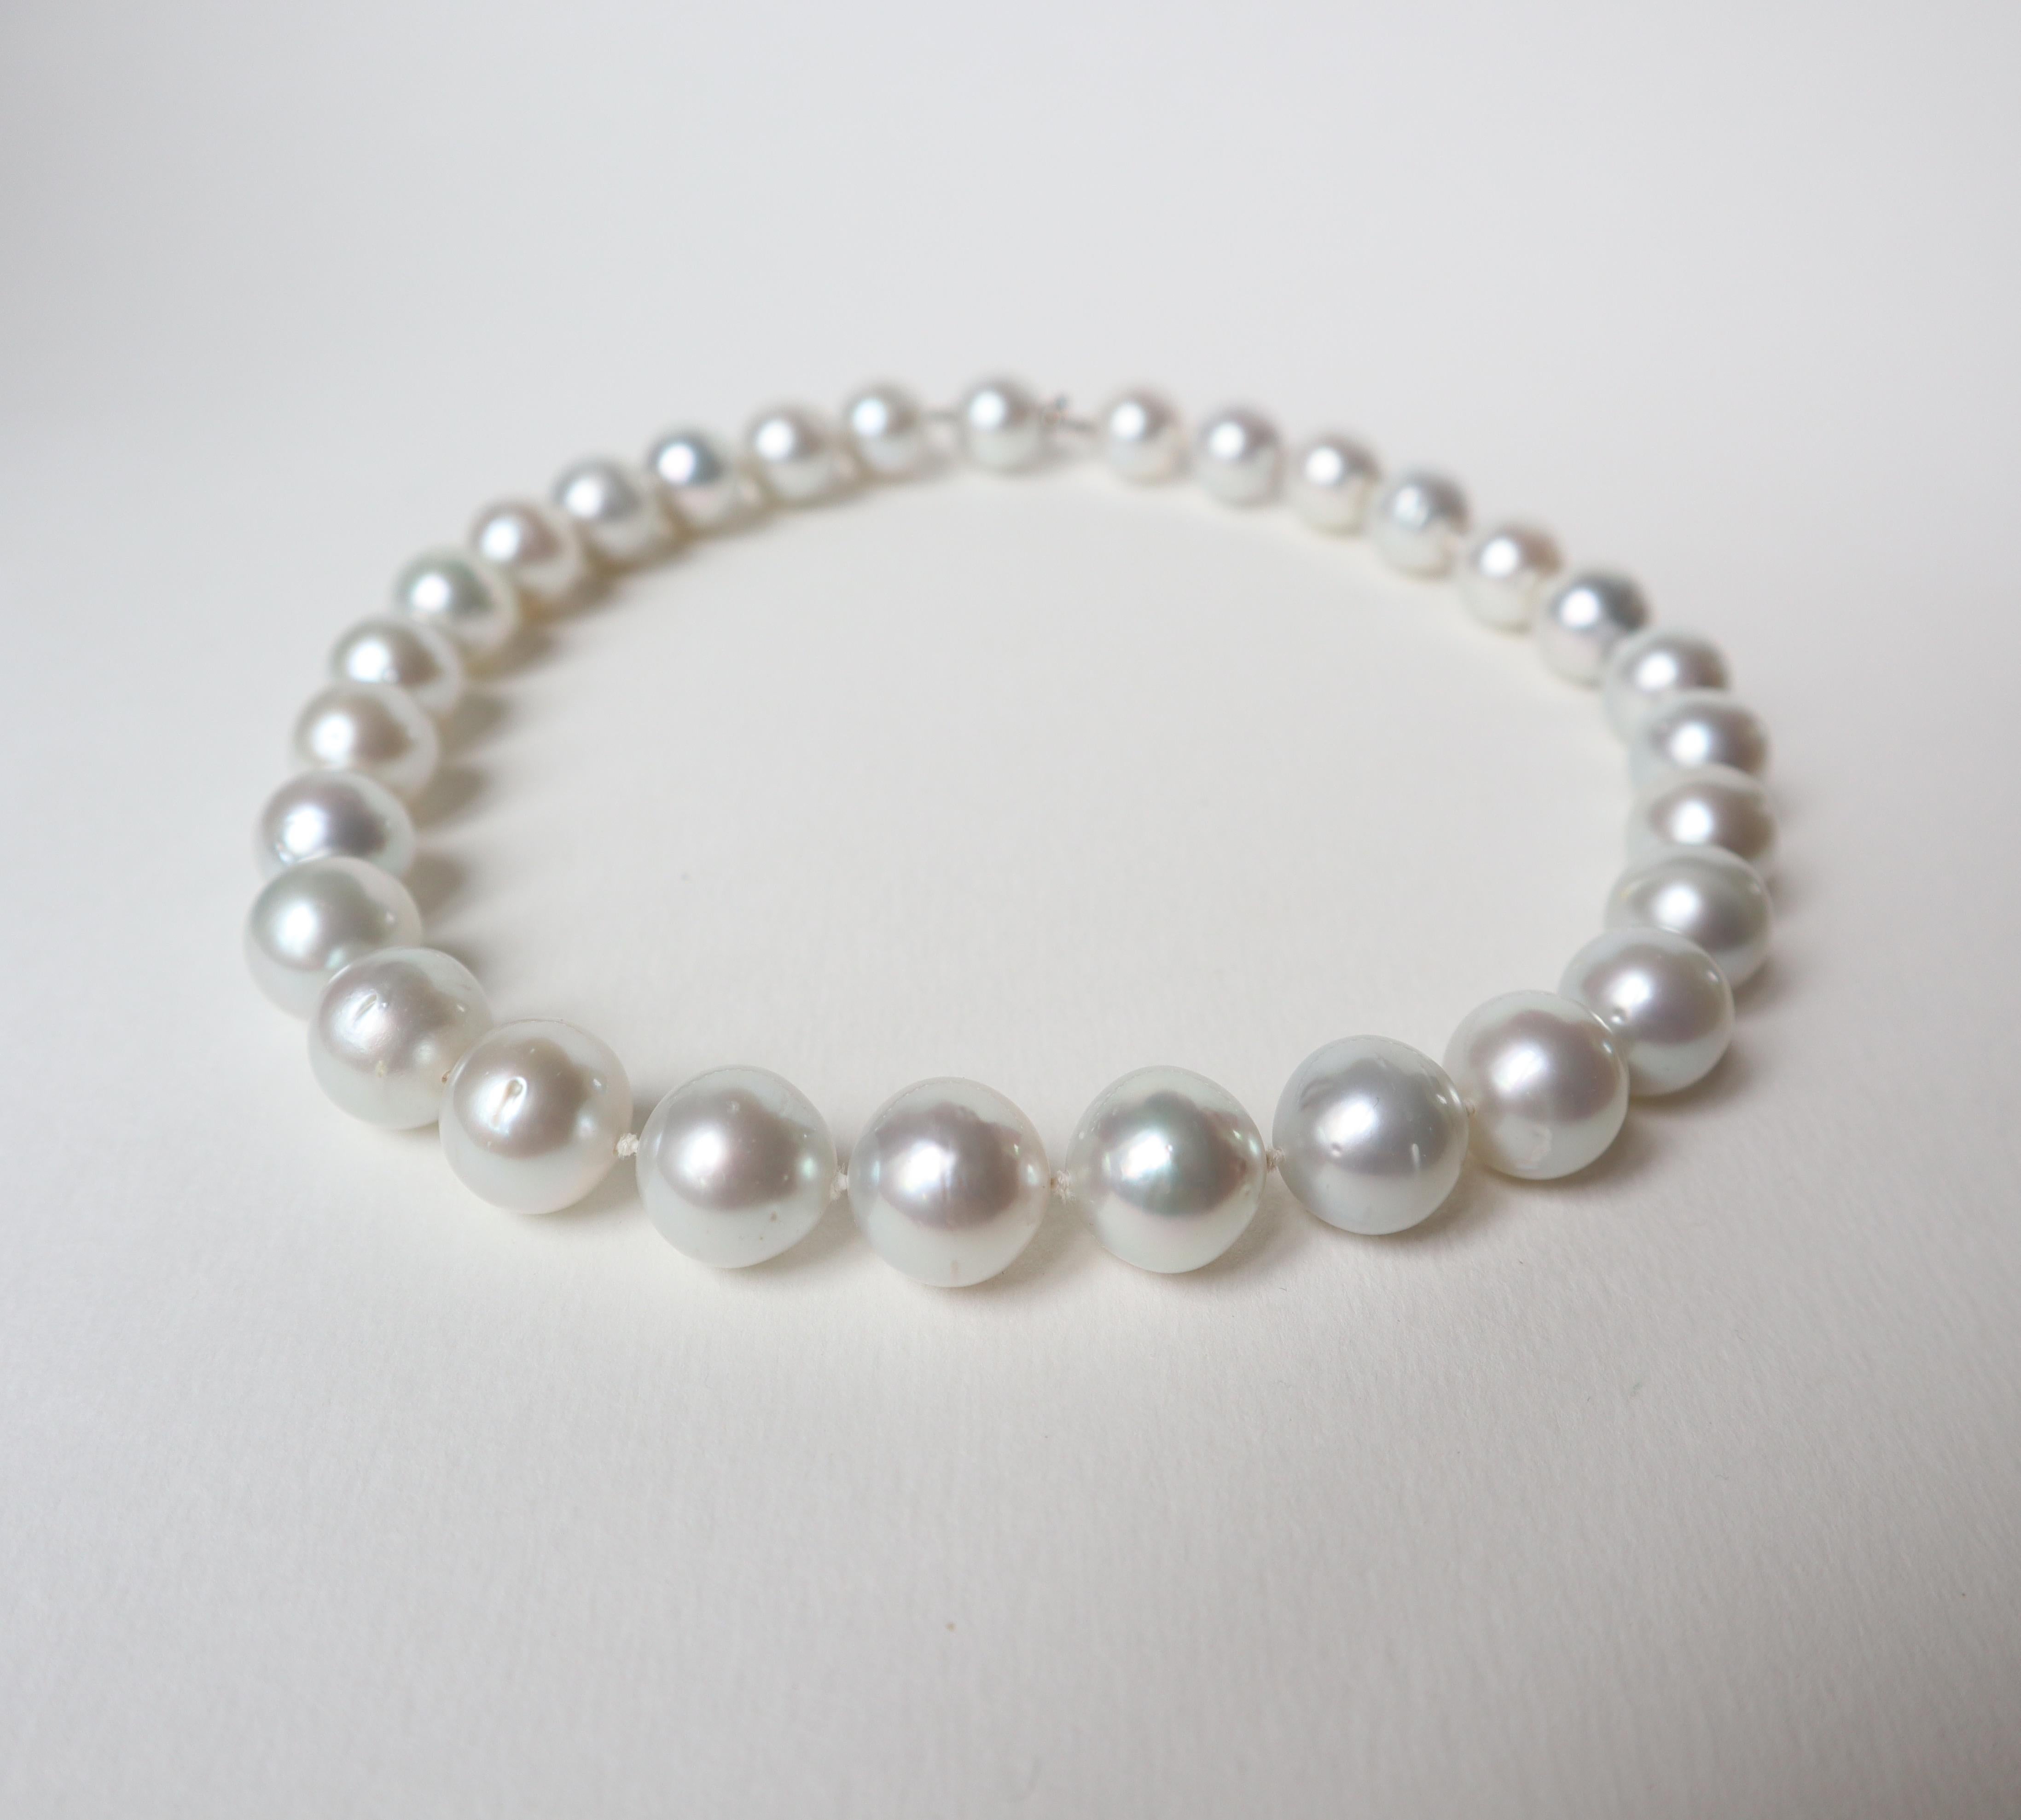 Necklace of 29 South Sea Pearls including a breakthrough to make an invisible clasp with an 18-carat white gold mechanism. Drop-shaped necklace ranging from 15 mm for the largest to 13 mm for the smallest pearl on the clasp.
Length: 43.5cm
Gross